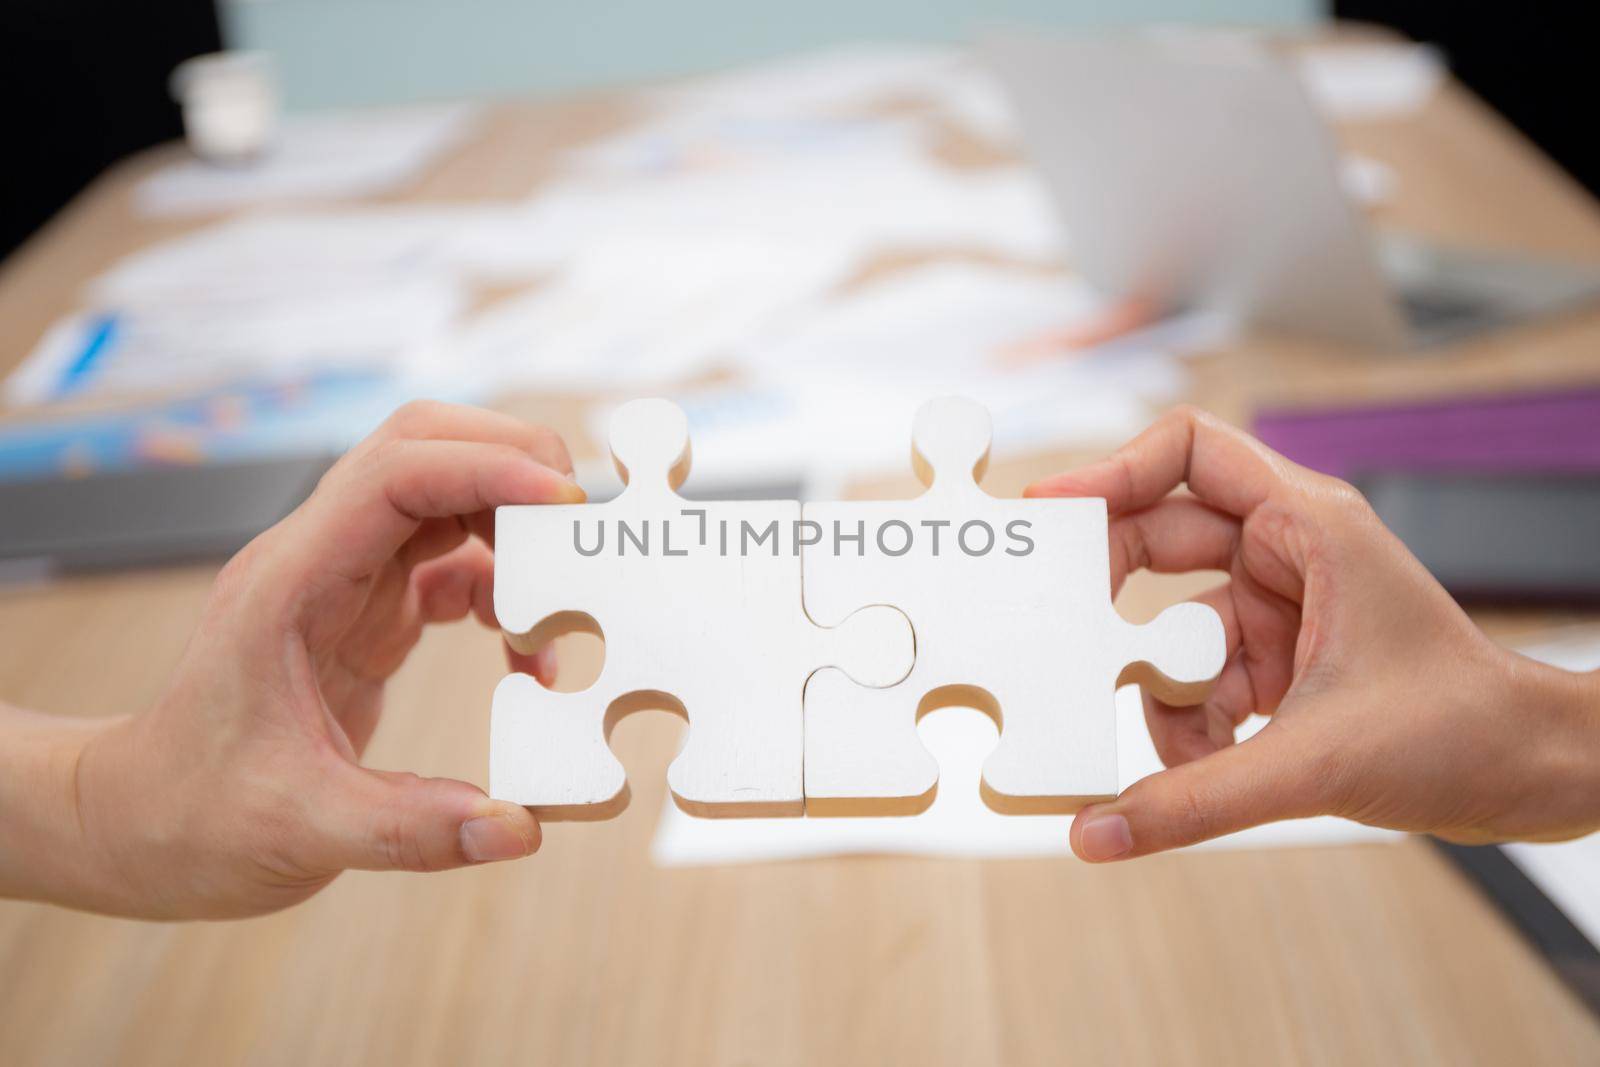 Hands of team young business and partner holding piece jigsaw for assembly is metaphor, teamwork symbol, bonding and harmony in team, friendship and marketing, business and communication concepts.